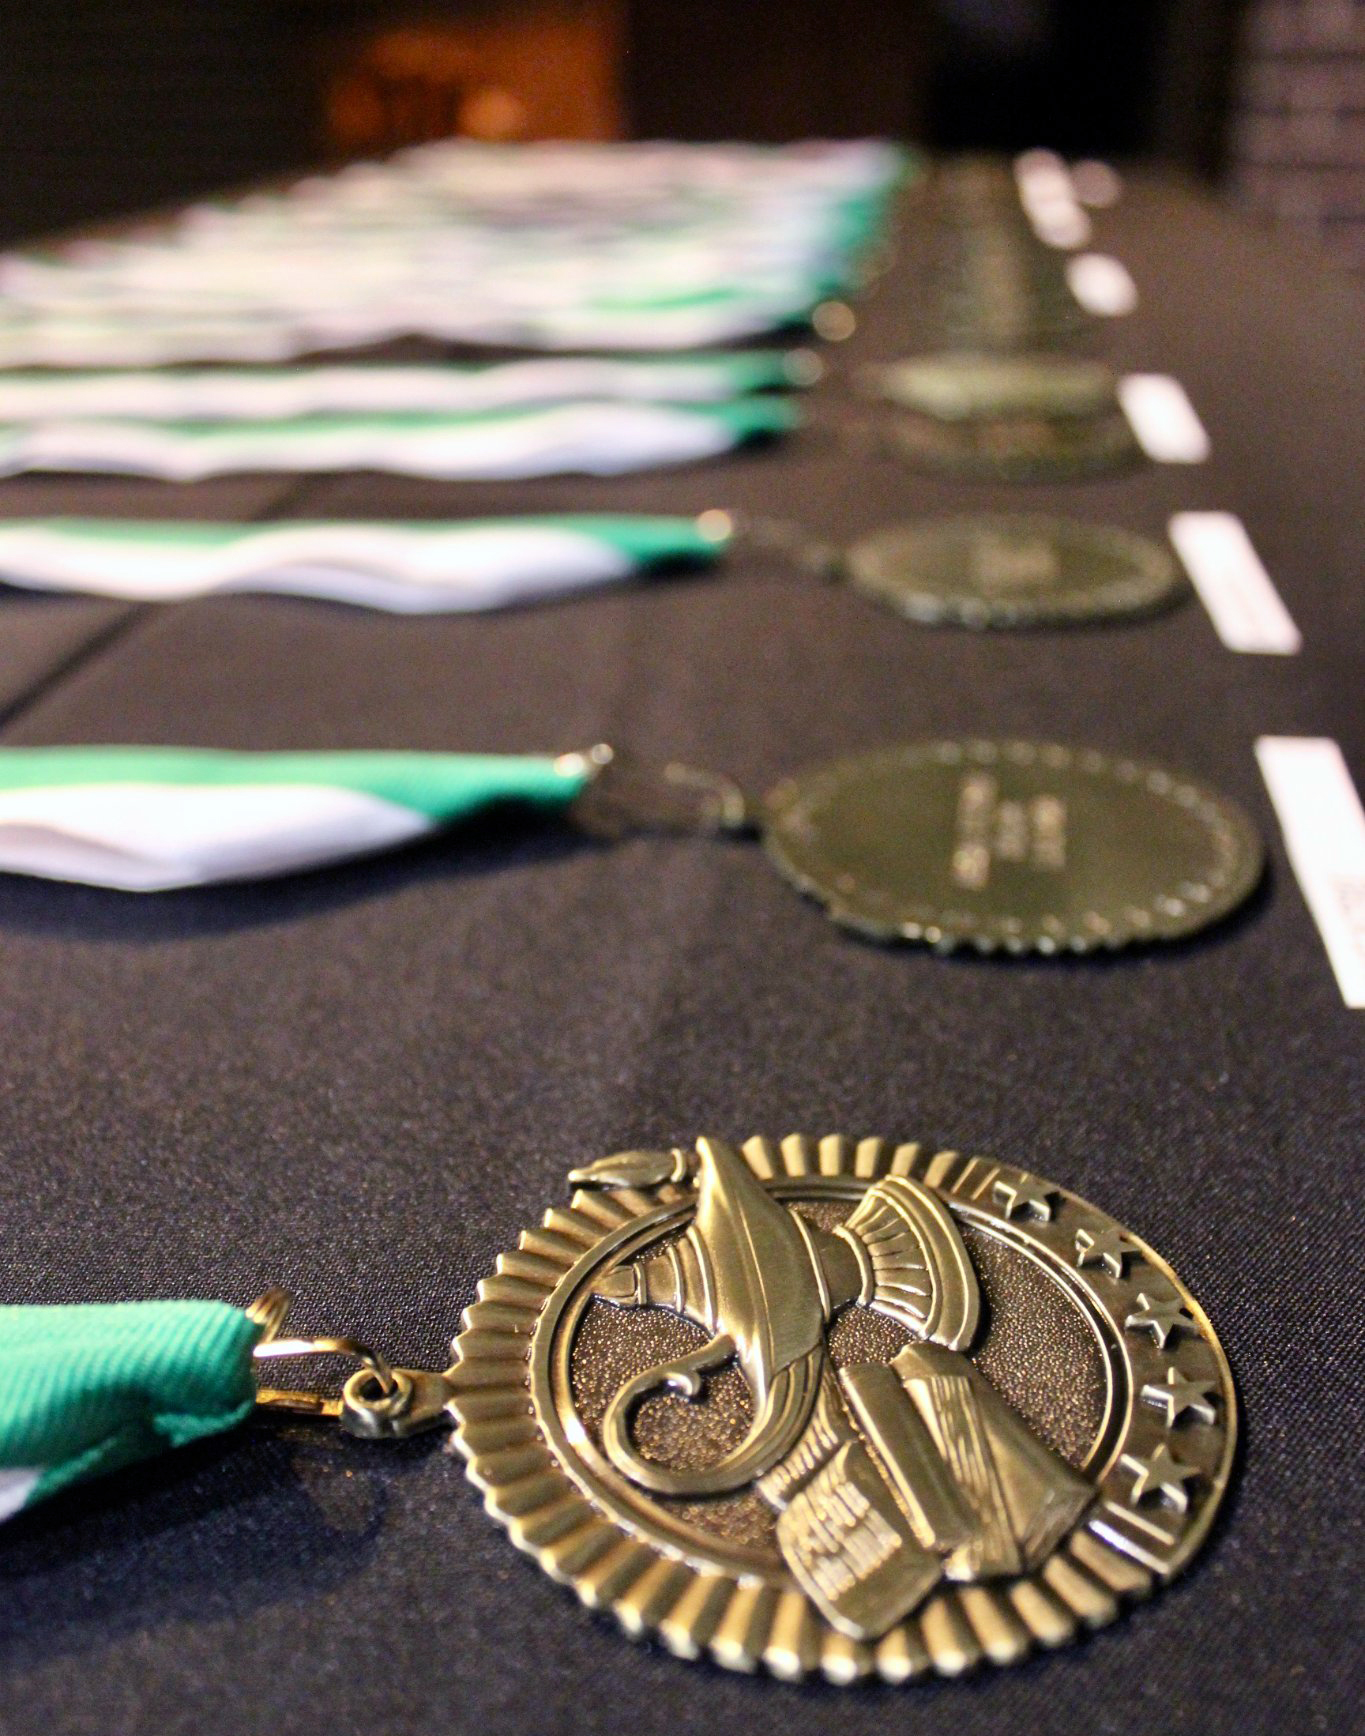 Awards of Excellence medals